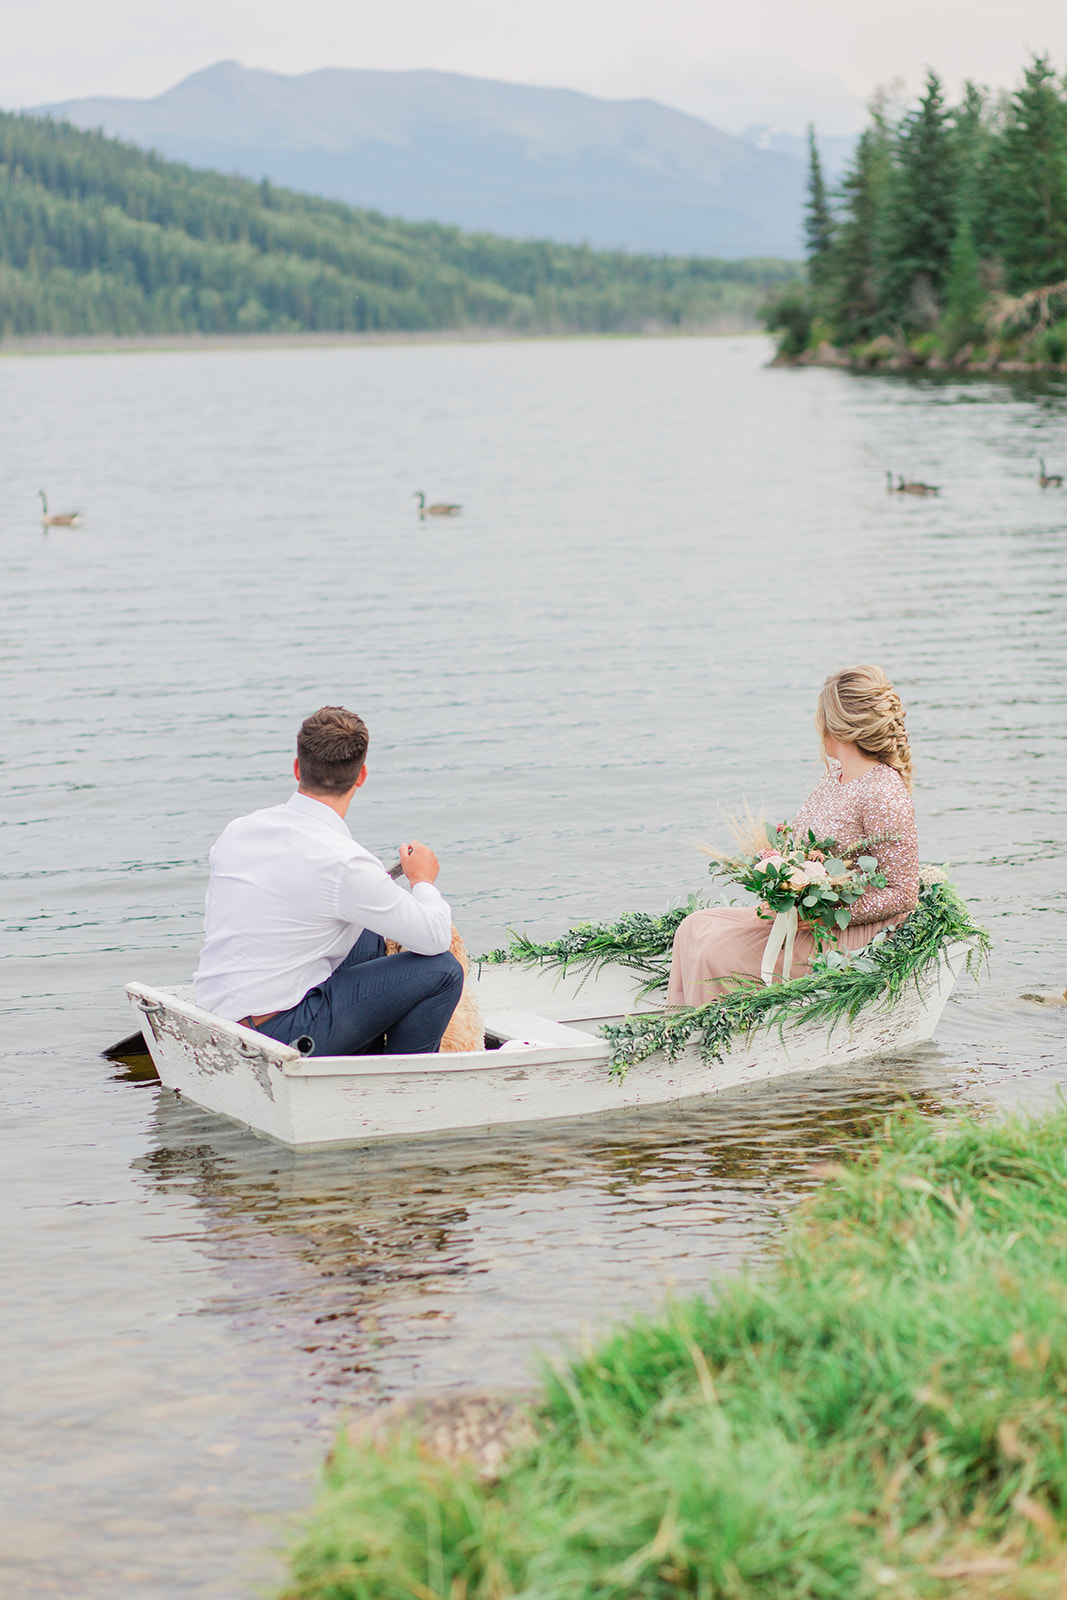 Rowboat lakeside elopement inspiration with mountain views